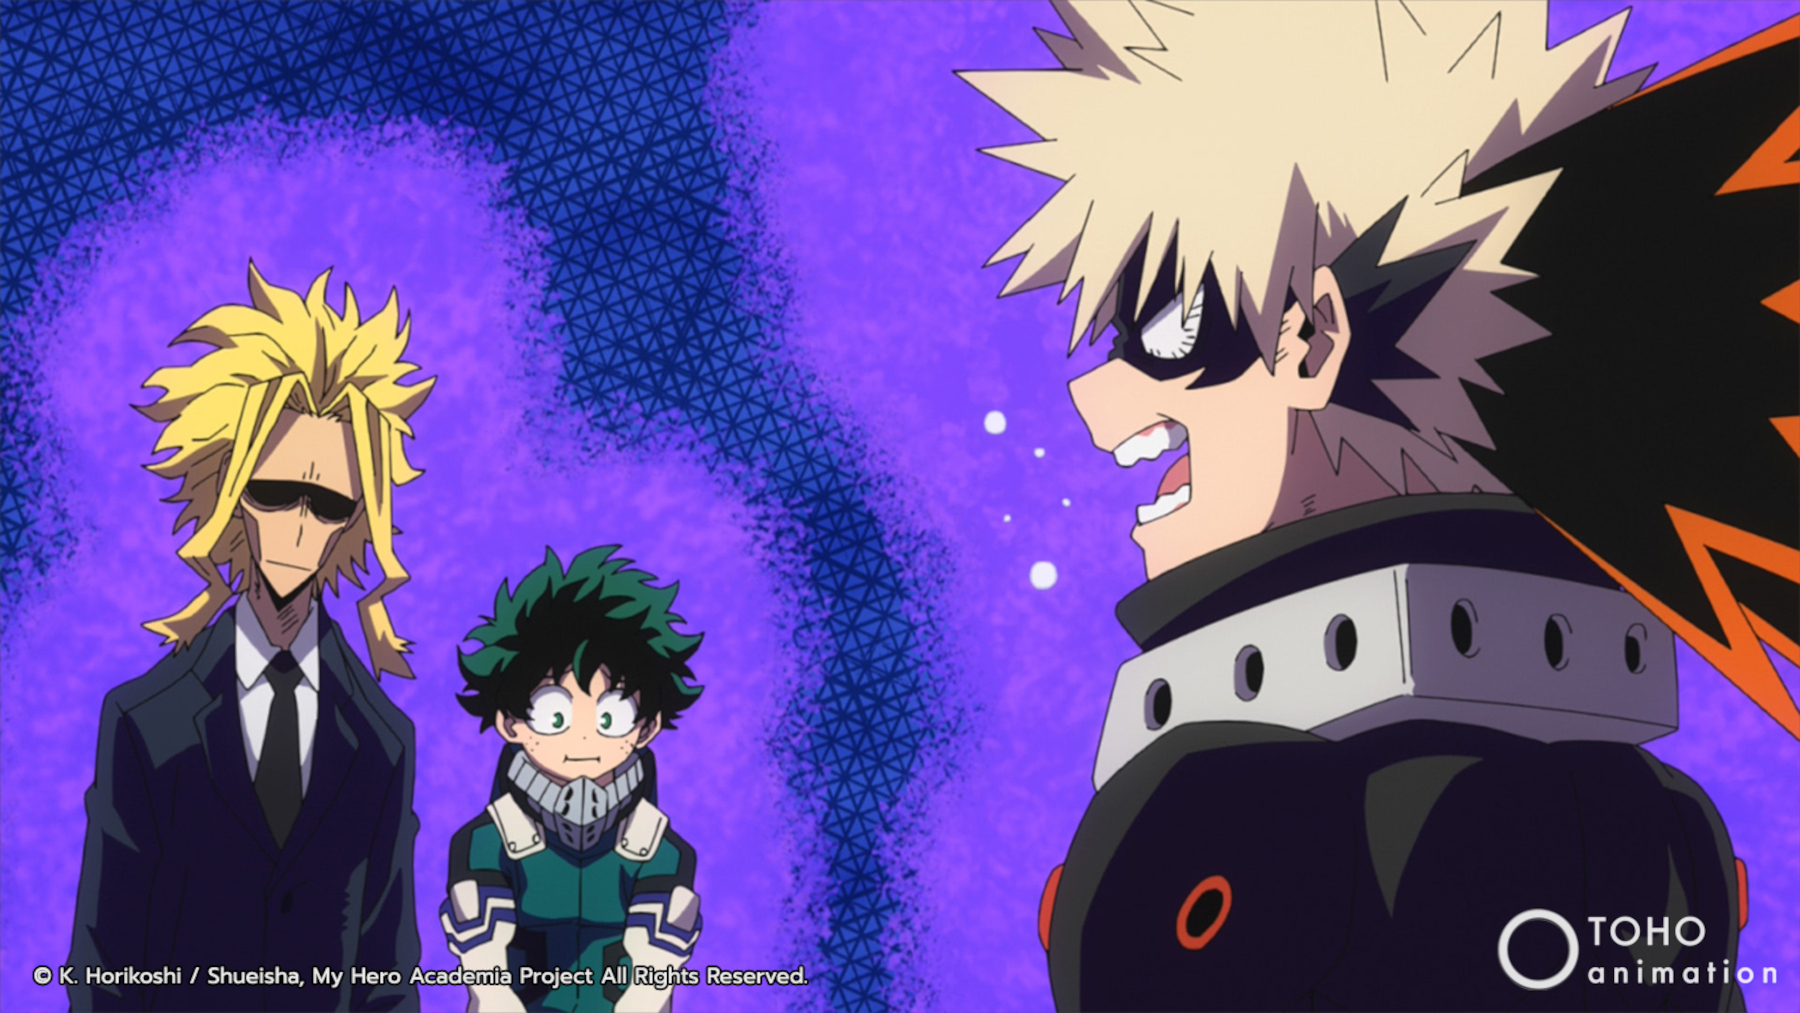 A still from 'My Hero Academia' Season 5 for our list of best anime to watch in summer 2022. In it, Bakugo is yelling at Deku and All Might.